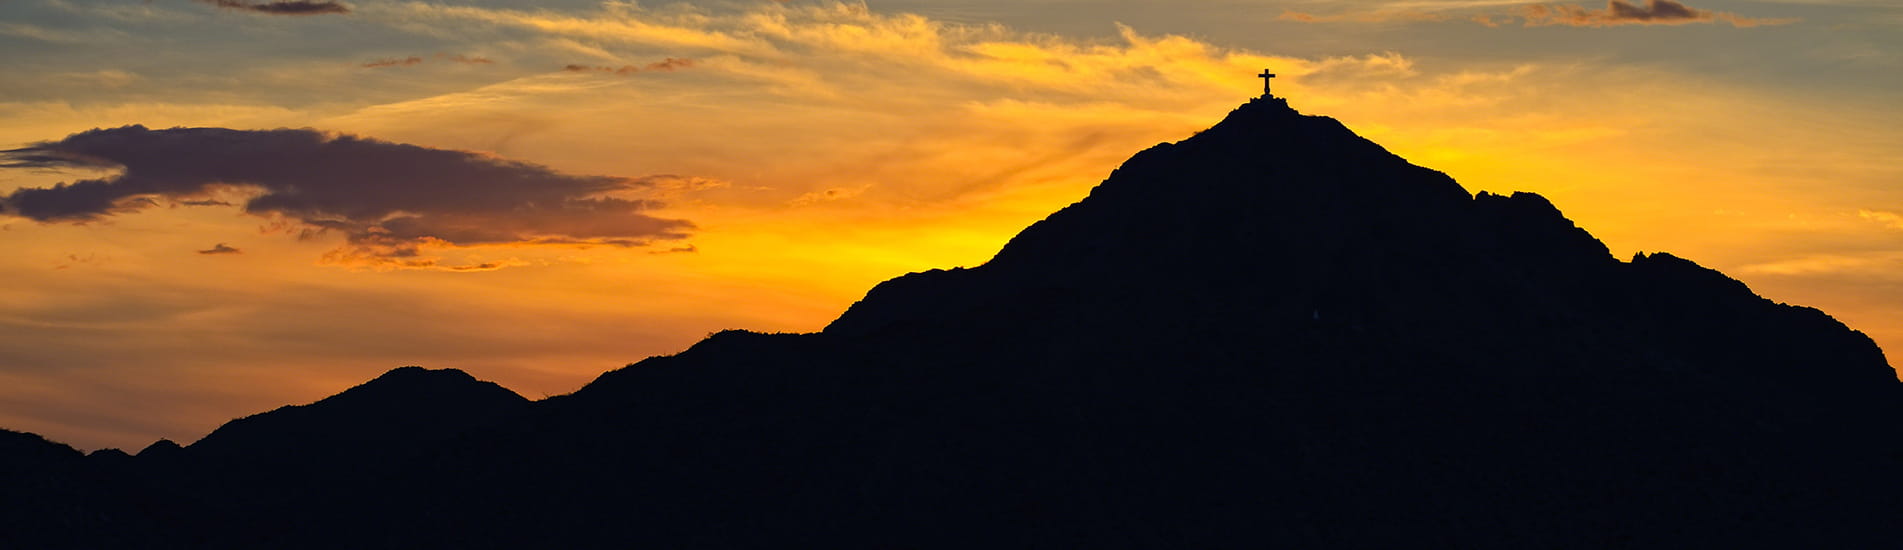 A mountain silhouette with a cross at the peak against an auburn sunset. 